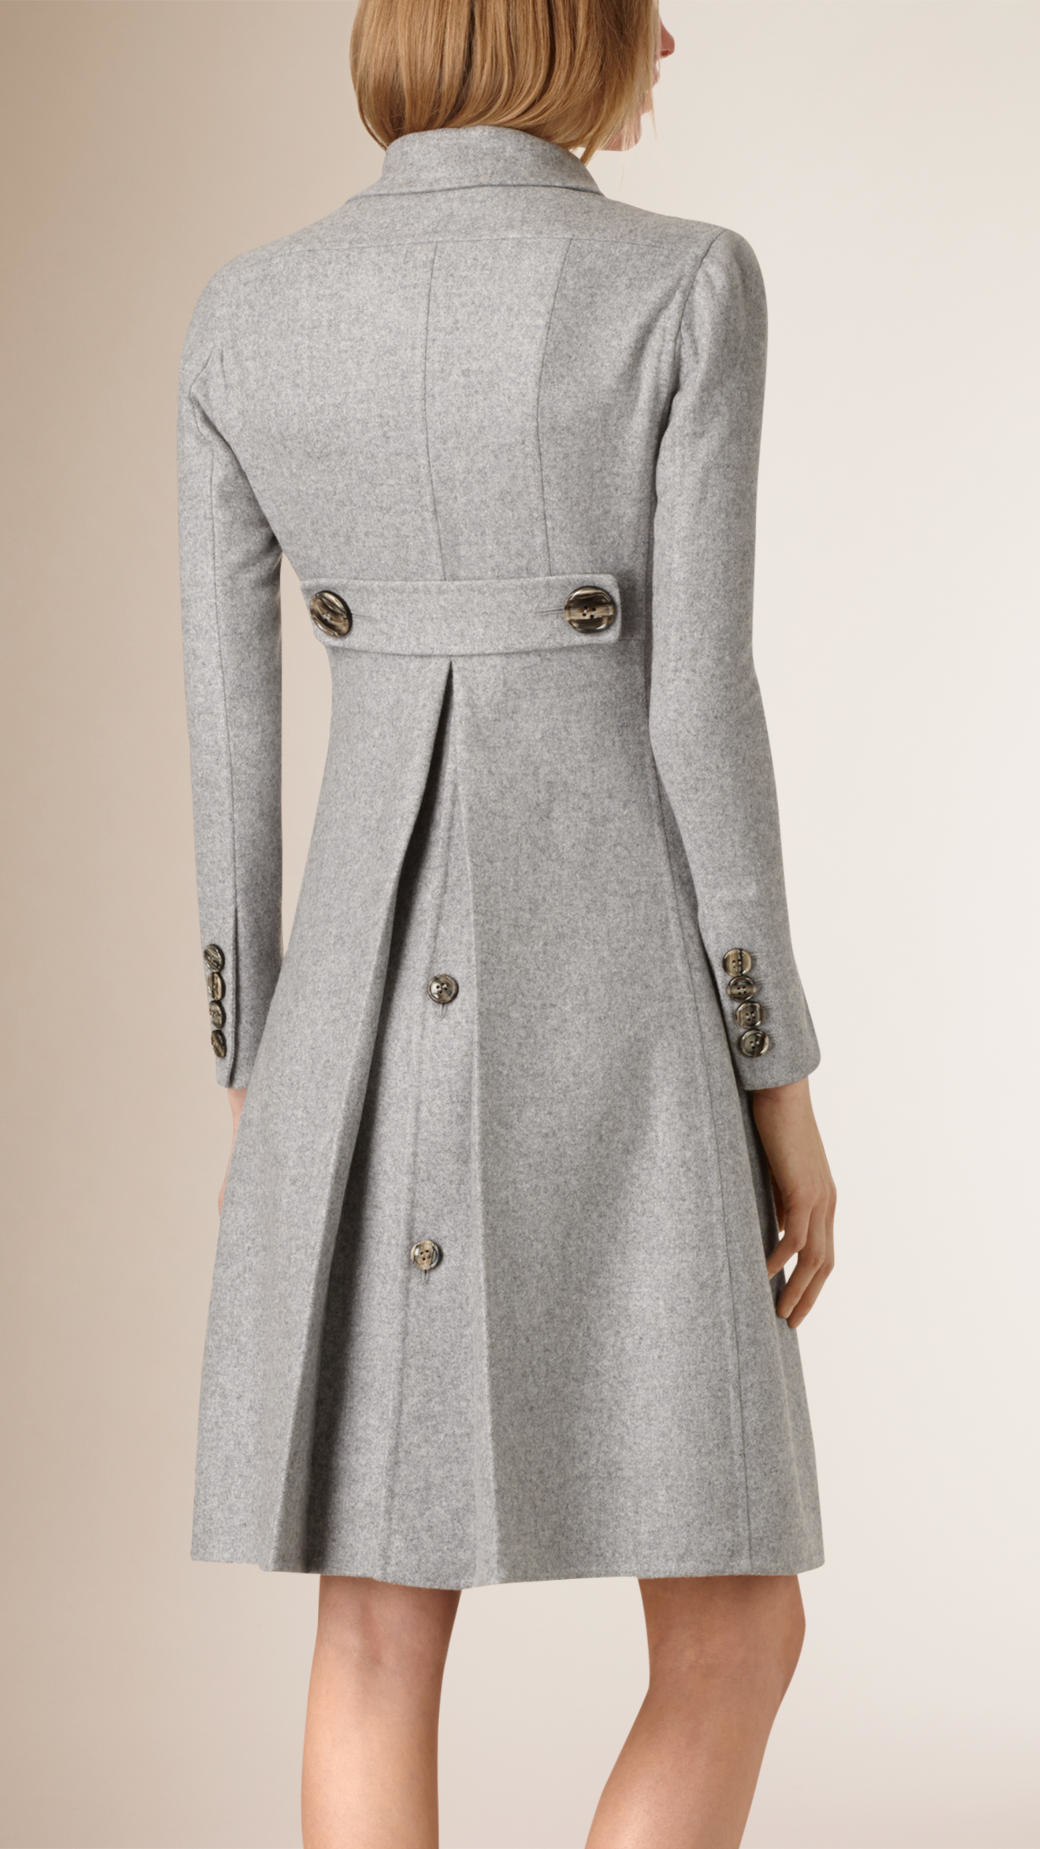 Burberry Tailored Double-breasted Cashmere Coat in Light Grey Melange ...